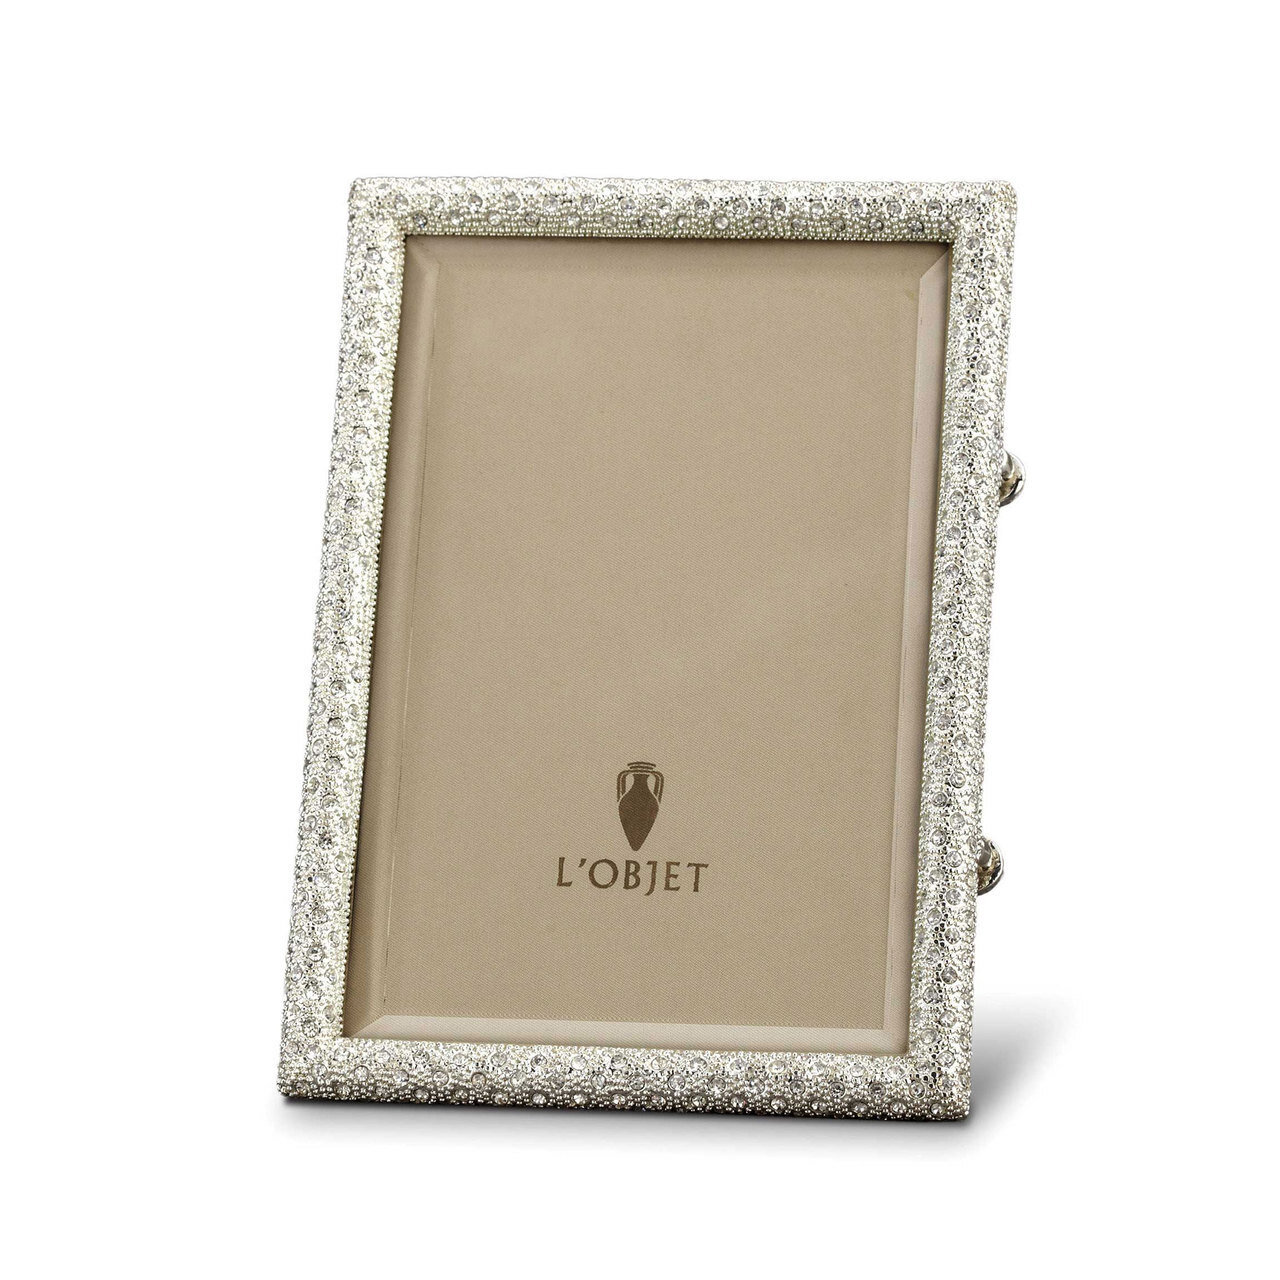 L'Objet Rectangular Pave 5 x 7 Inch Platinum with White Crystals Picture Frame